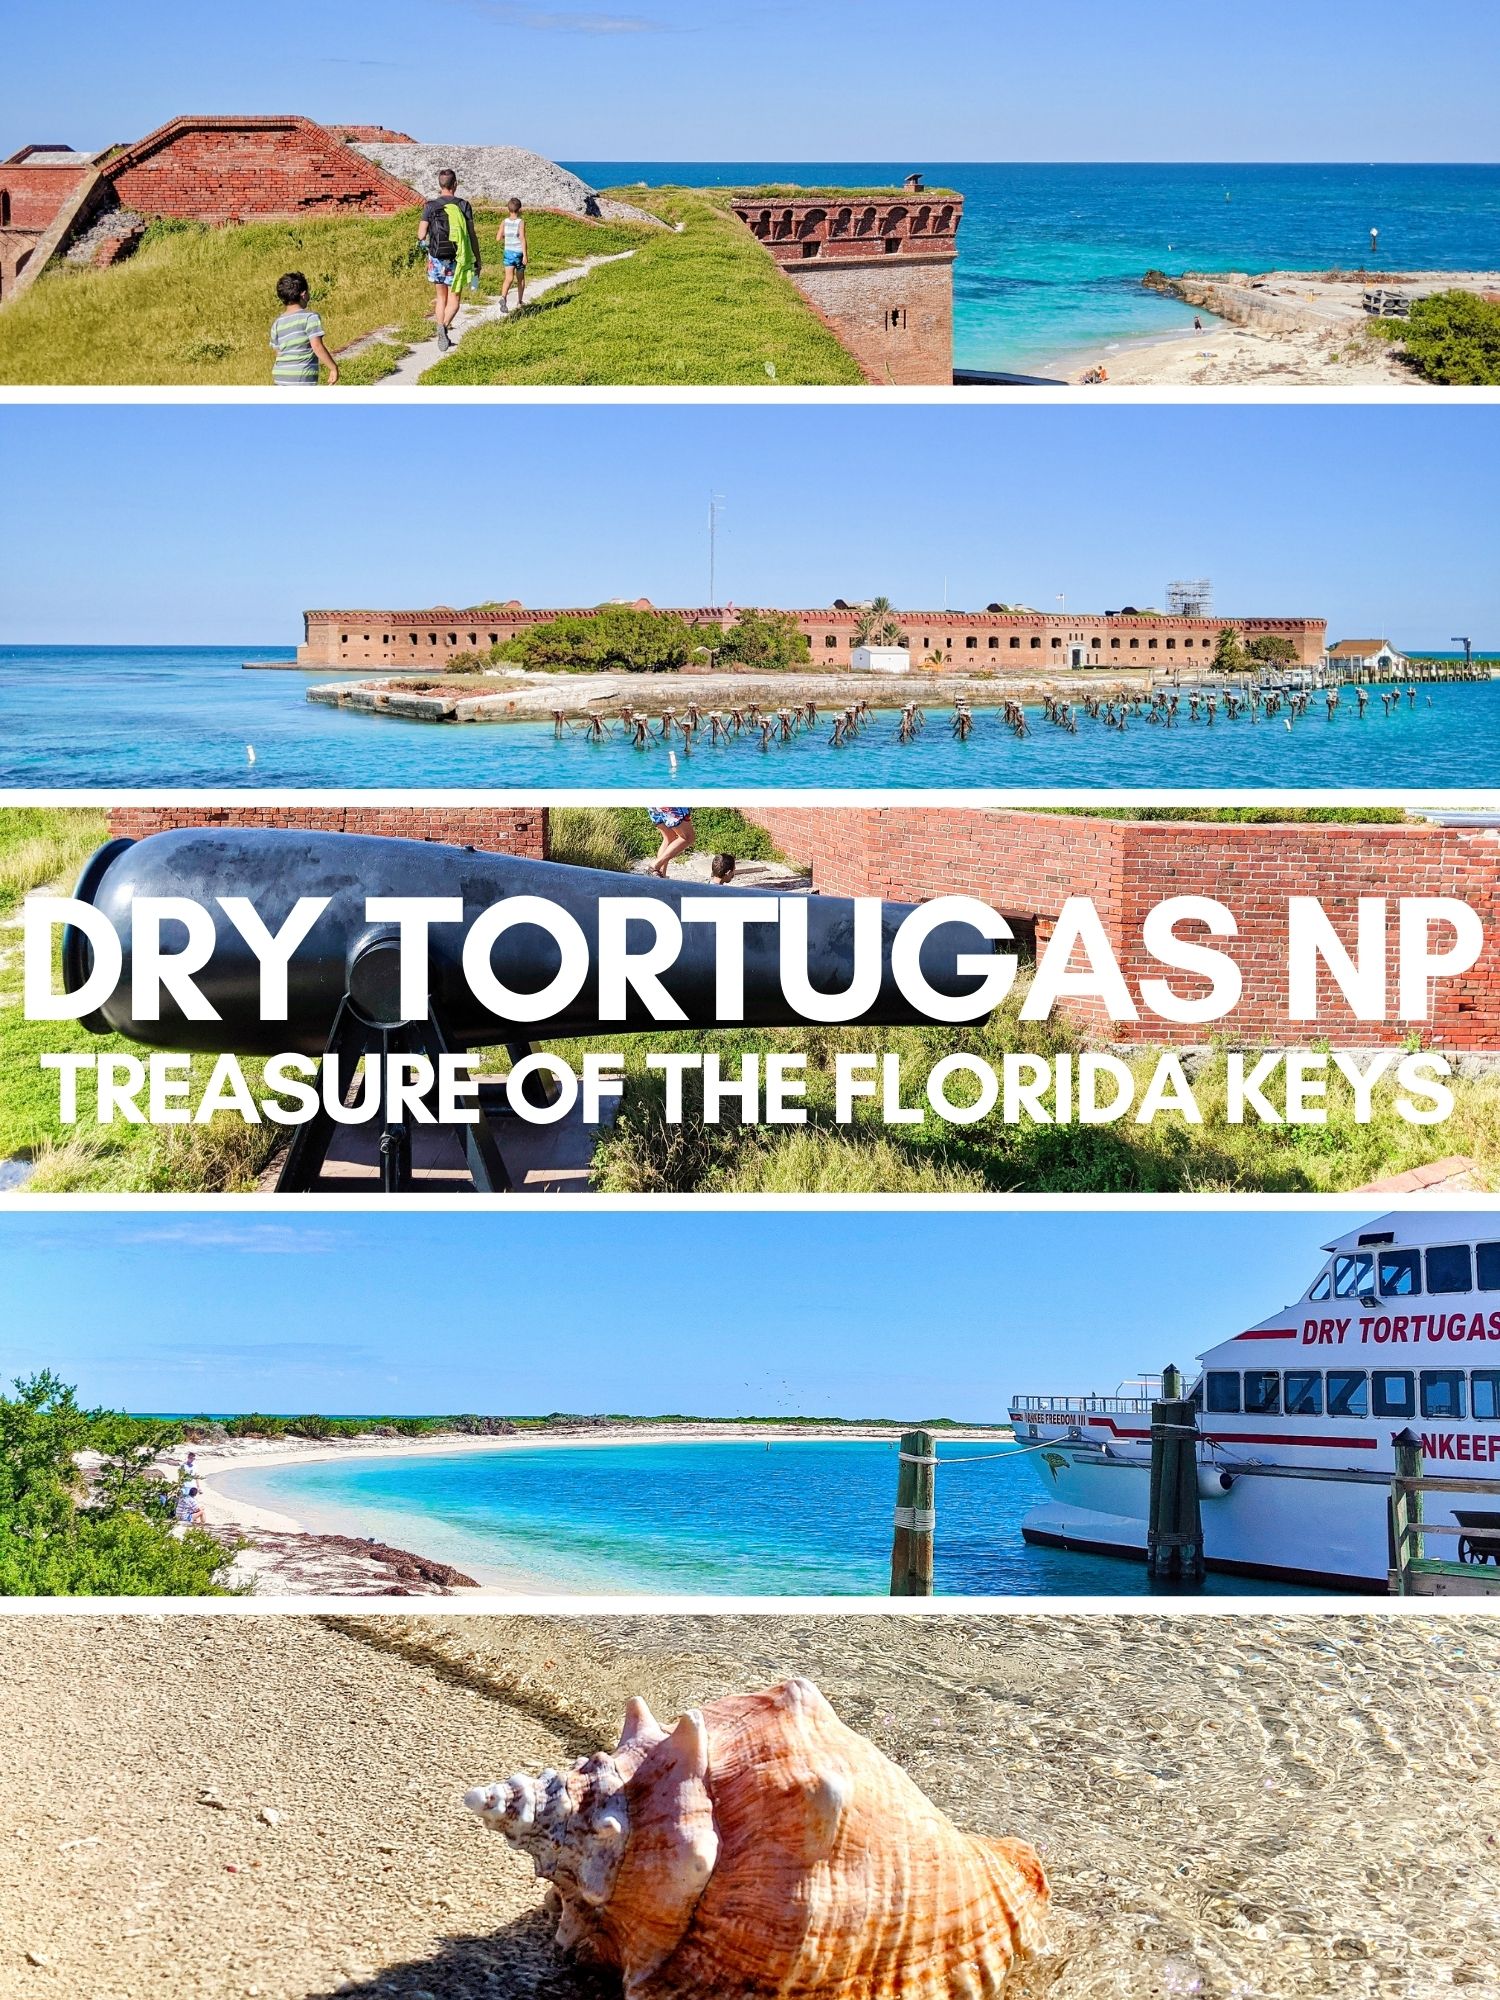 Dry Tortugas is one of the least visited National Parks in the USA. Everything you need to know for the ferry to Fort Jefferson, seaplane to Dry Tortugas, camping and visiting from Key West. Best of the Florida Keys.